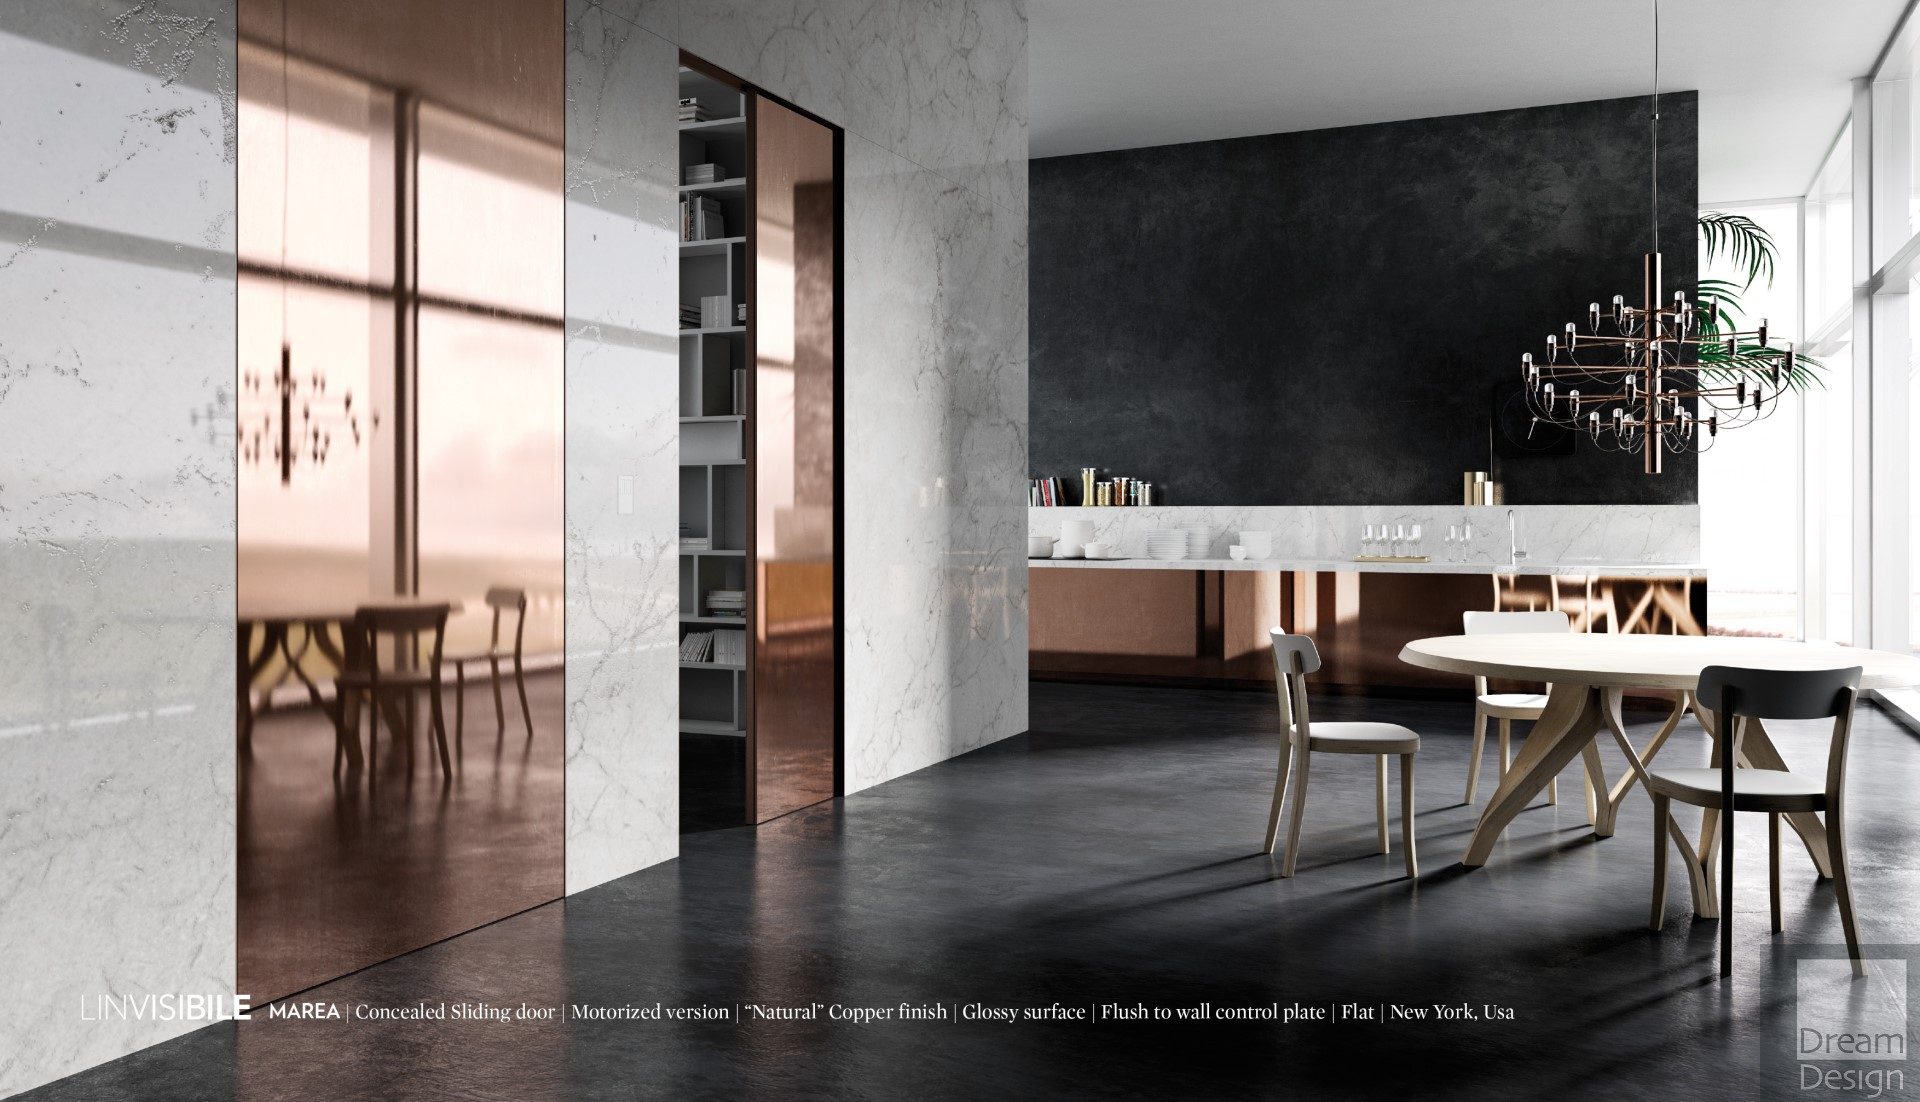 Linvisibile Marea Concealed Sliding Doors